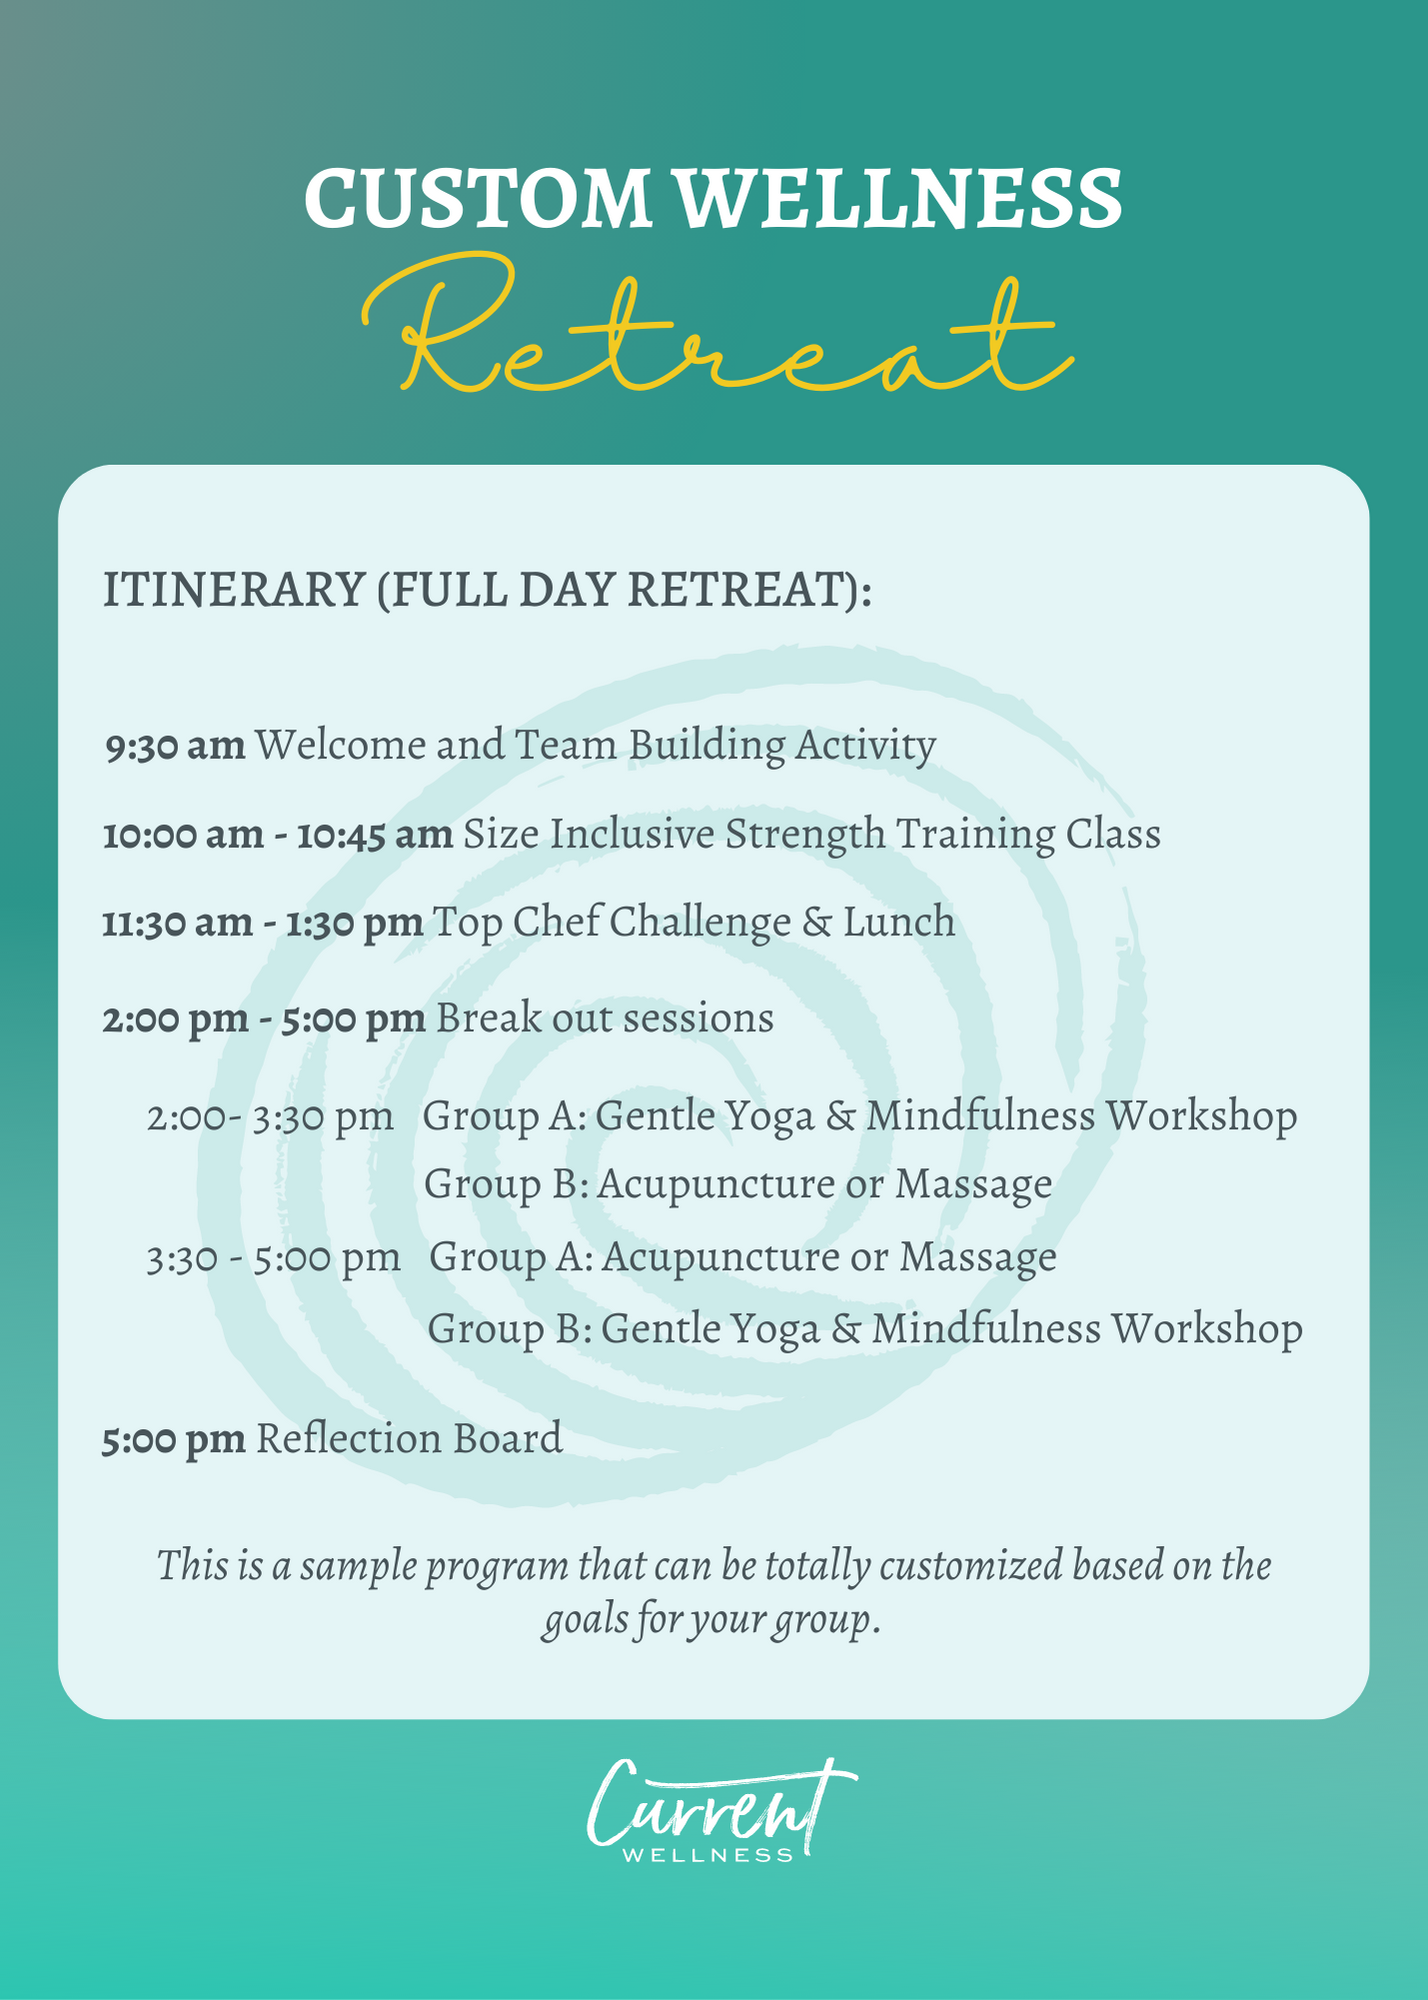 Custom Wellness Retreat Sample Itinerary (Full Day retreat): 9:30 am Welcome and Team Building Activity 10:00 am - 10:45 am Size Inclusive Strength Training Class 11:30 am - 1:30 pm Top Chef Challenge & Lunch 2:00 pm - 5:00 pm Break out sessions 2:00- 3:30 pm Group A: Gentle Yoga & Mindfulness Workshop Group B: Acupuncture or Massage 3:30 - 5:00 pm Group A: Acupuncture or Massage Group B: Gentle Yoga & Mindfulness Workshop 5:00 pm Reflection Board This is a sample program that can be totally customized based on the goals for your group.